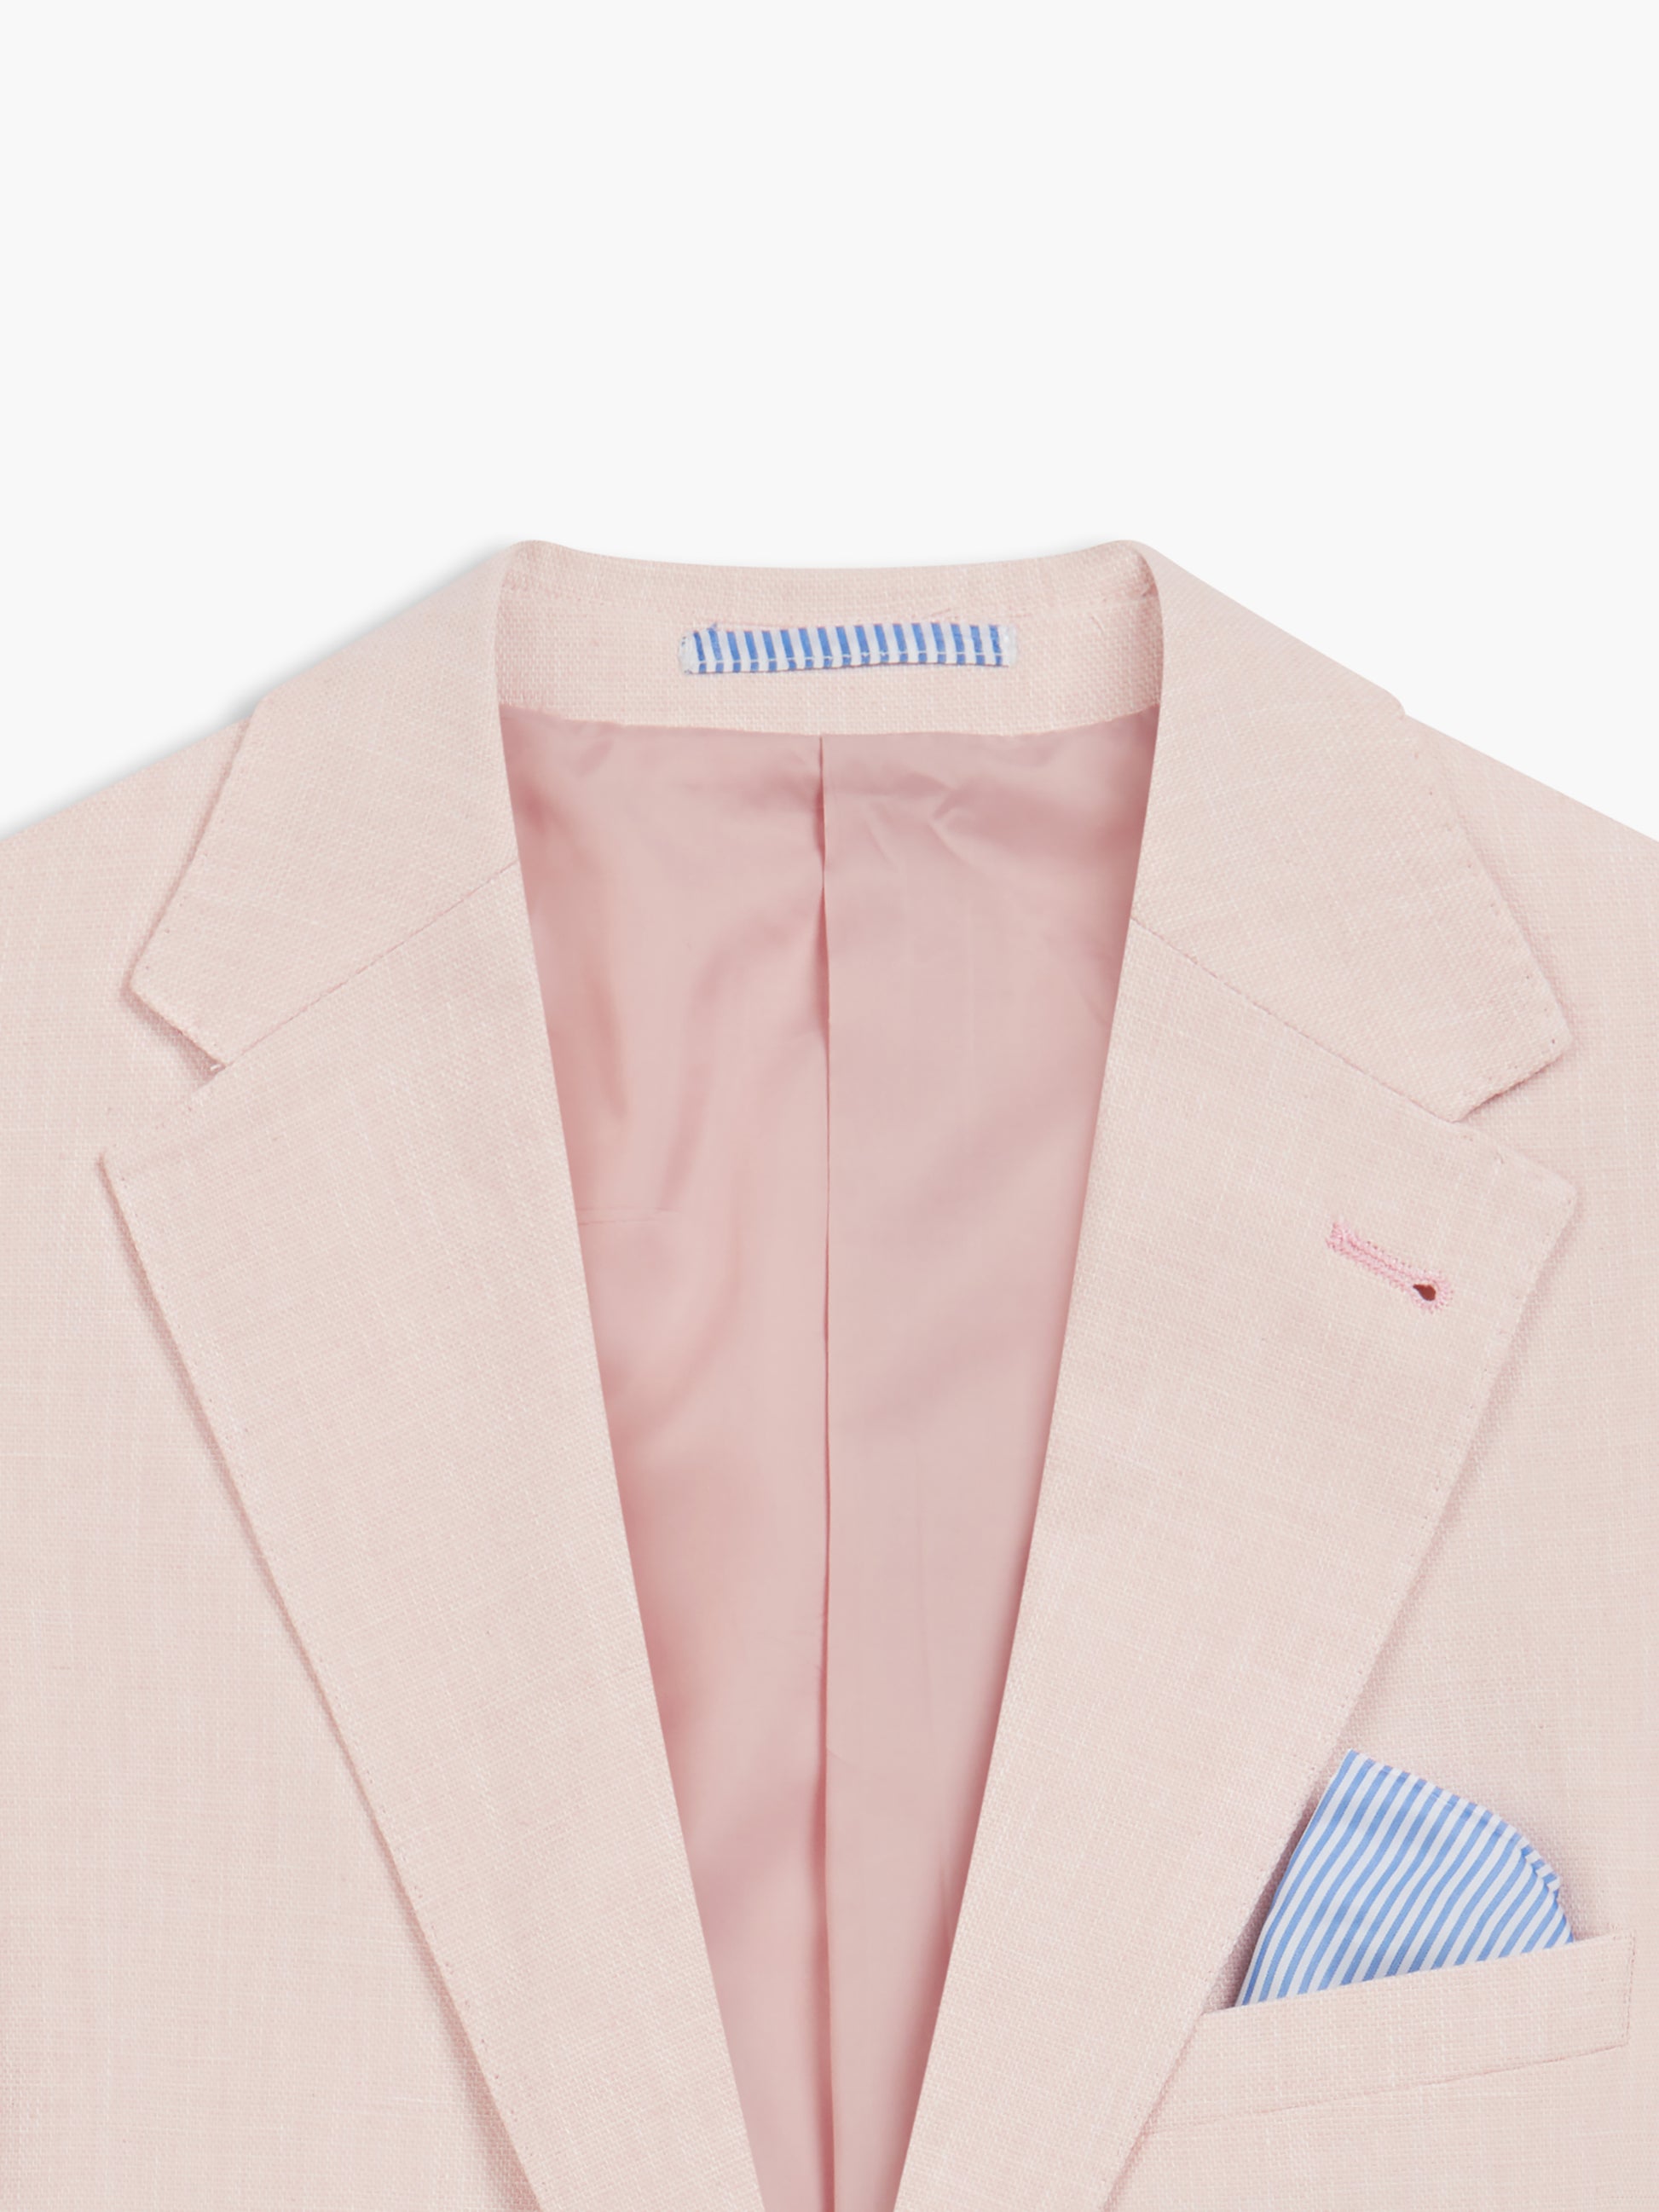 Image 9 of Slim Fit Single Breasted Linen Suit Jacket in Light Pink